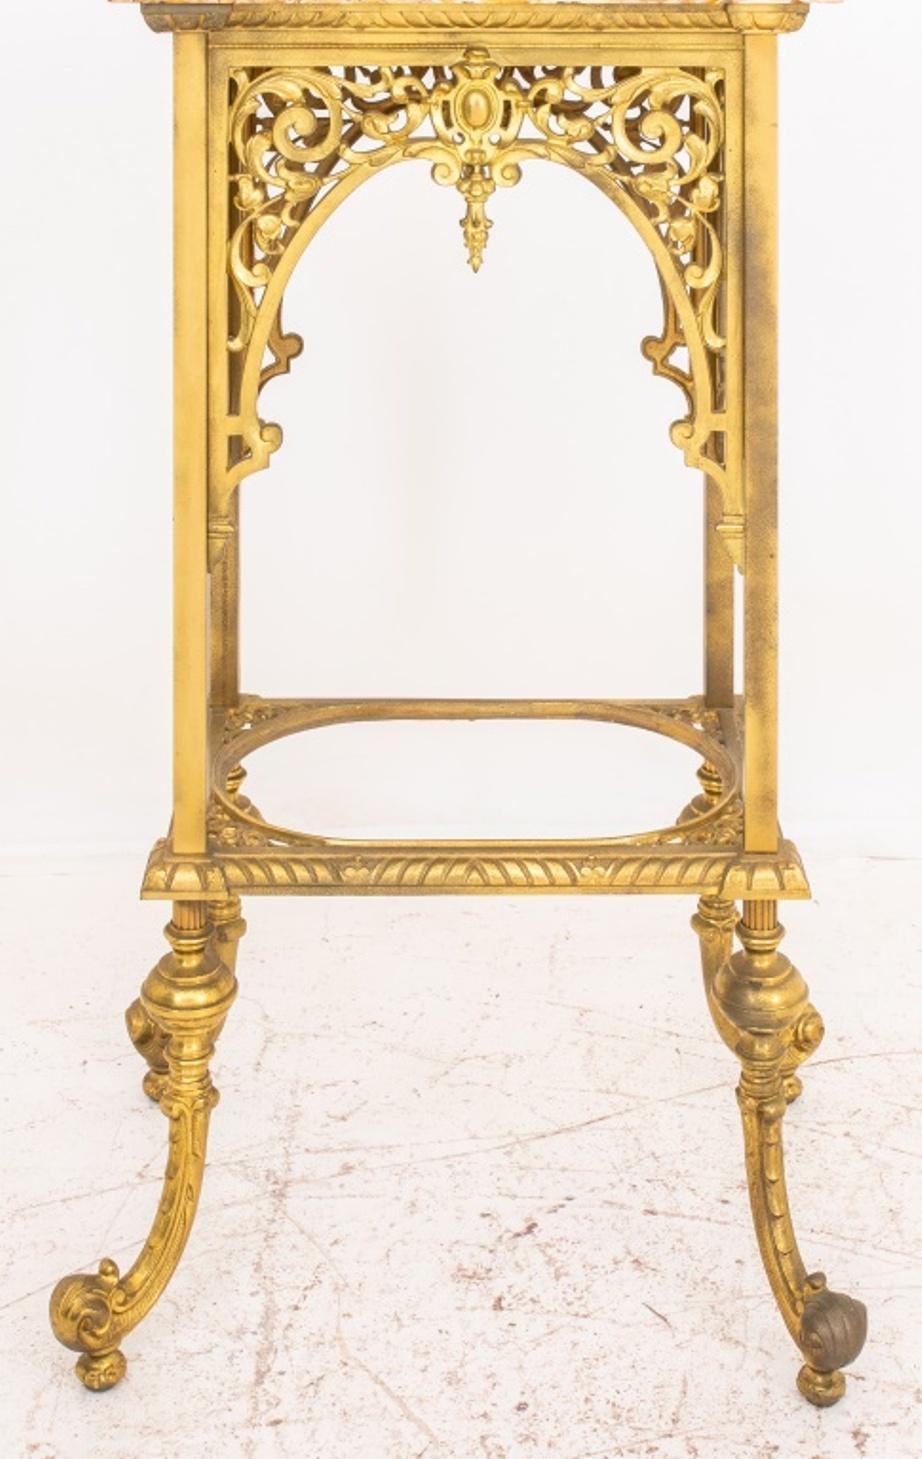  Early 20th C. Renaissance Revival Brass Side Table 1